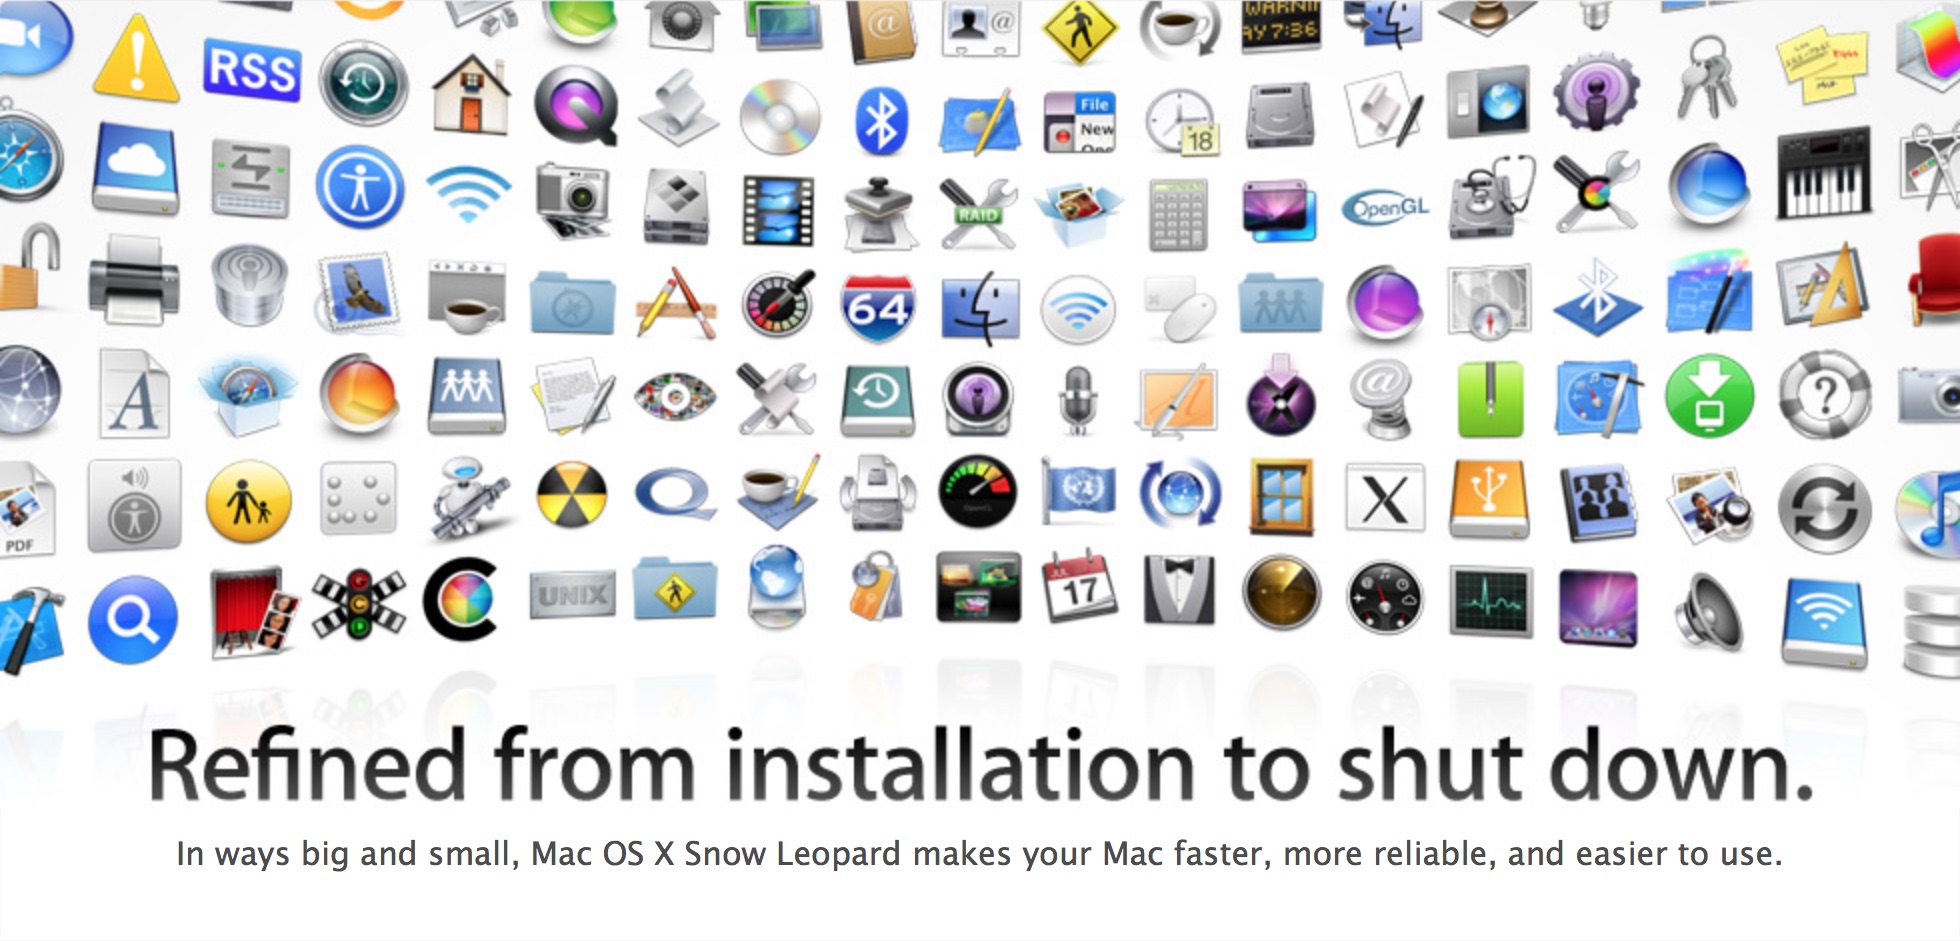 word for mac os x 10.6.8